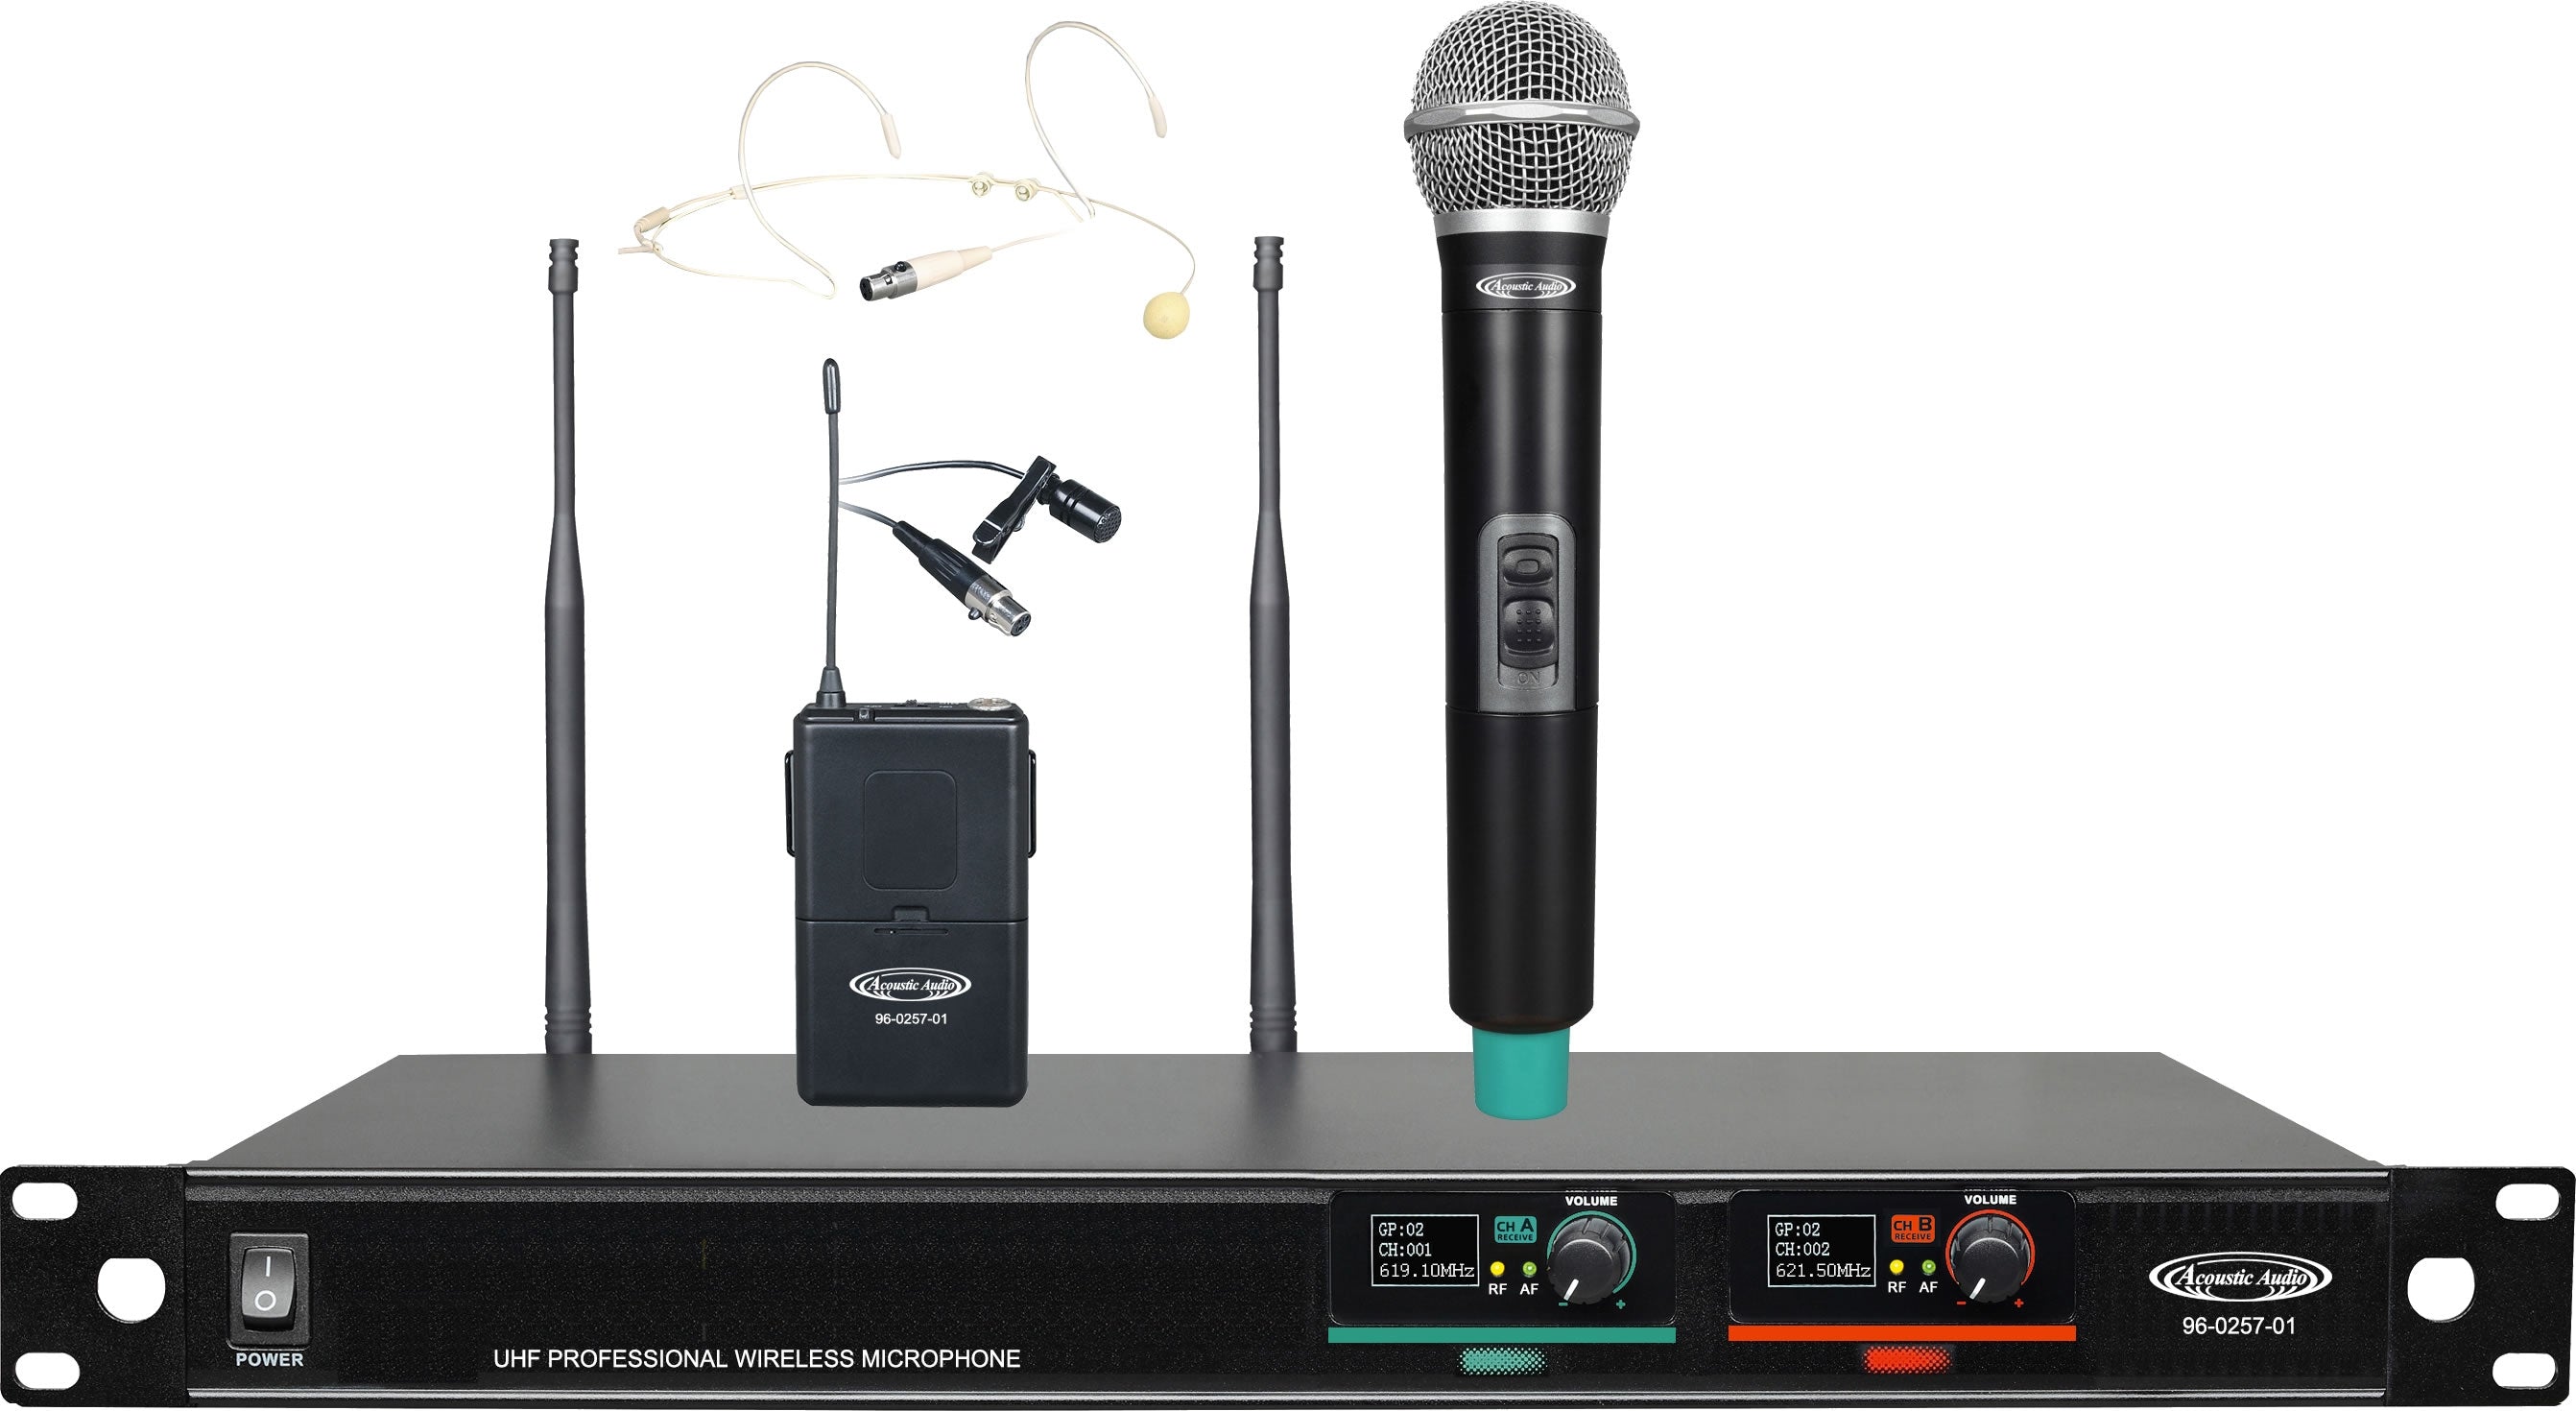 96-0257-01 UHF Professional Wireless Microphone Systems - 1*Wireless Microphone & 1*Headset